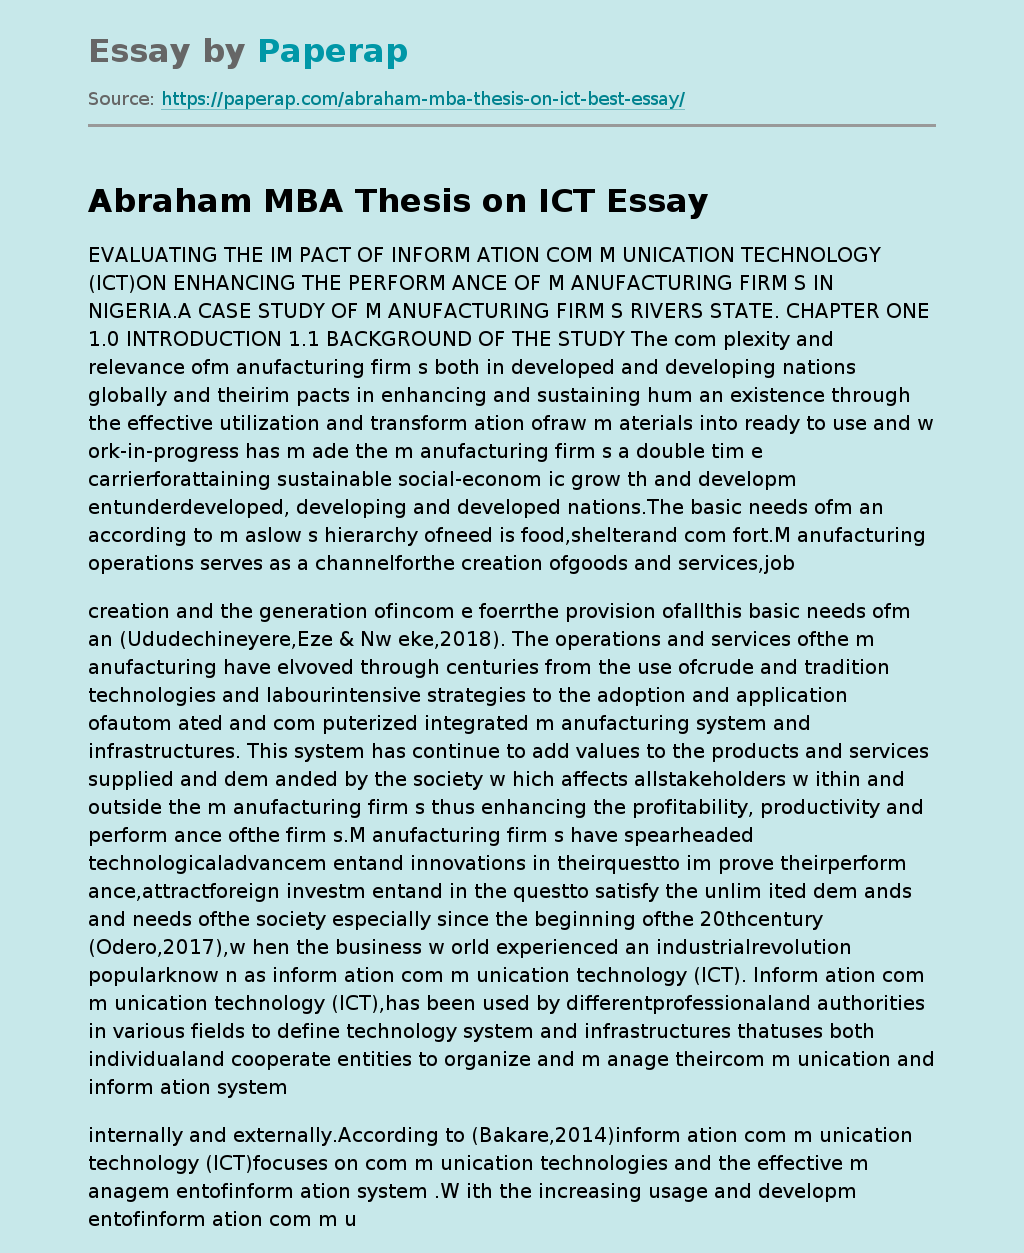 Abraham MBA Thesis on ICT